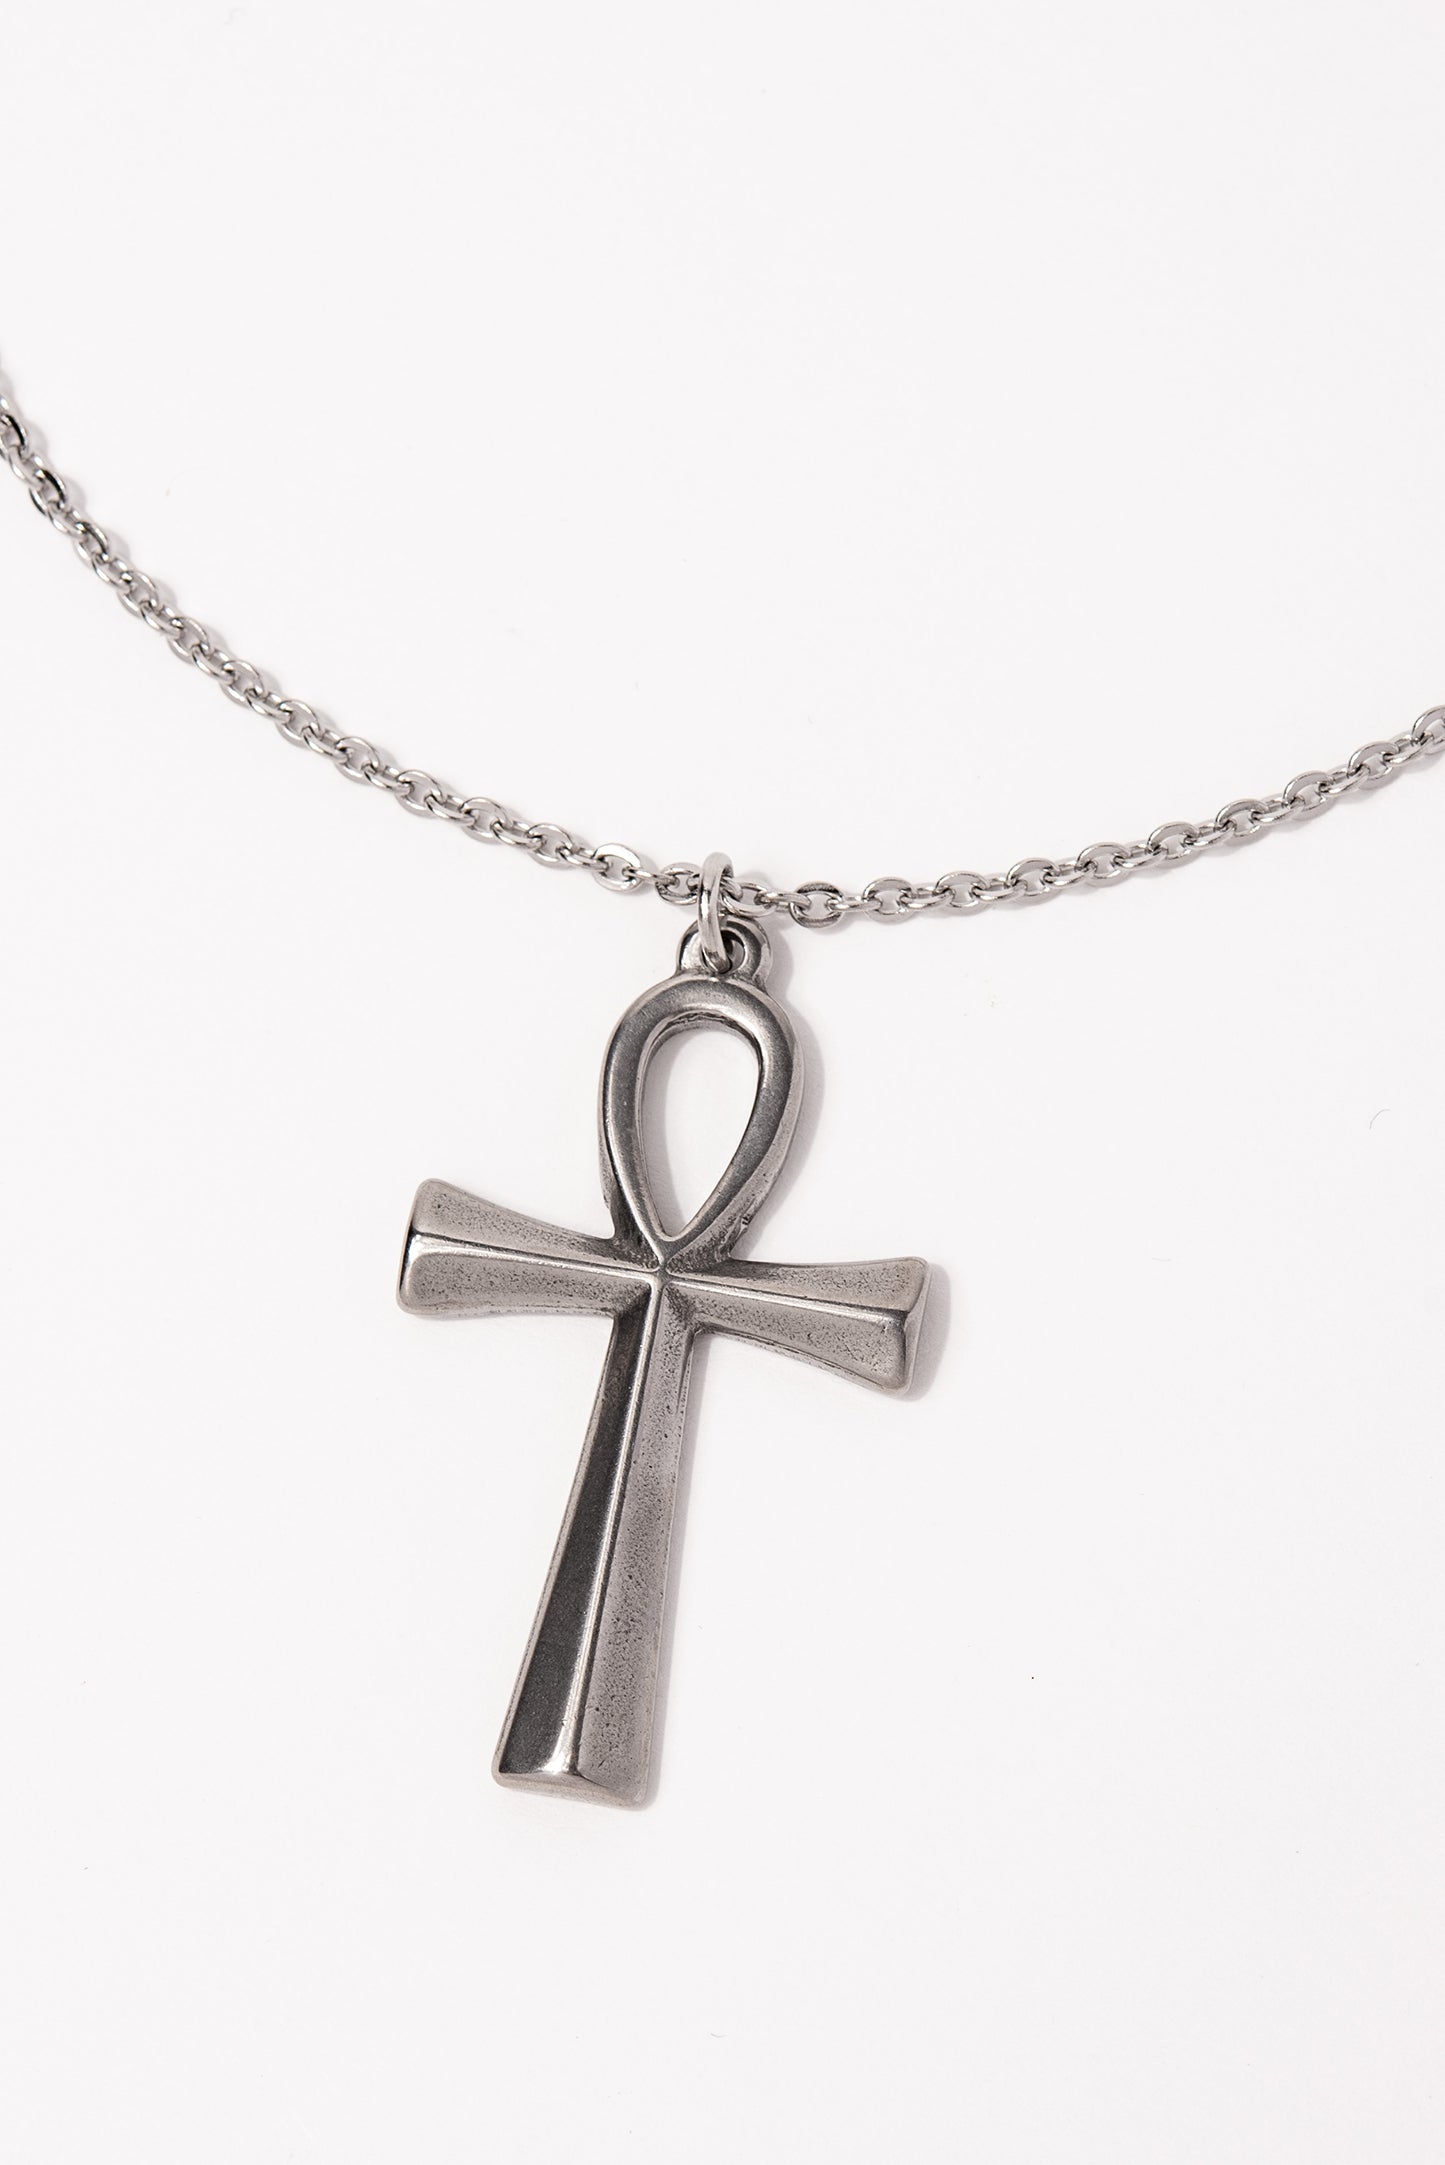 Stainless Steel Chain Necklace with Ankh Pendant